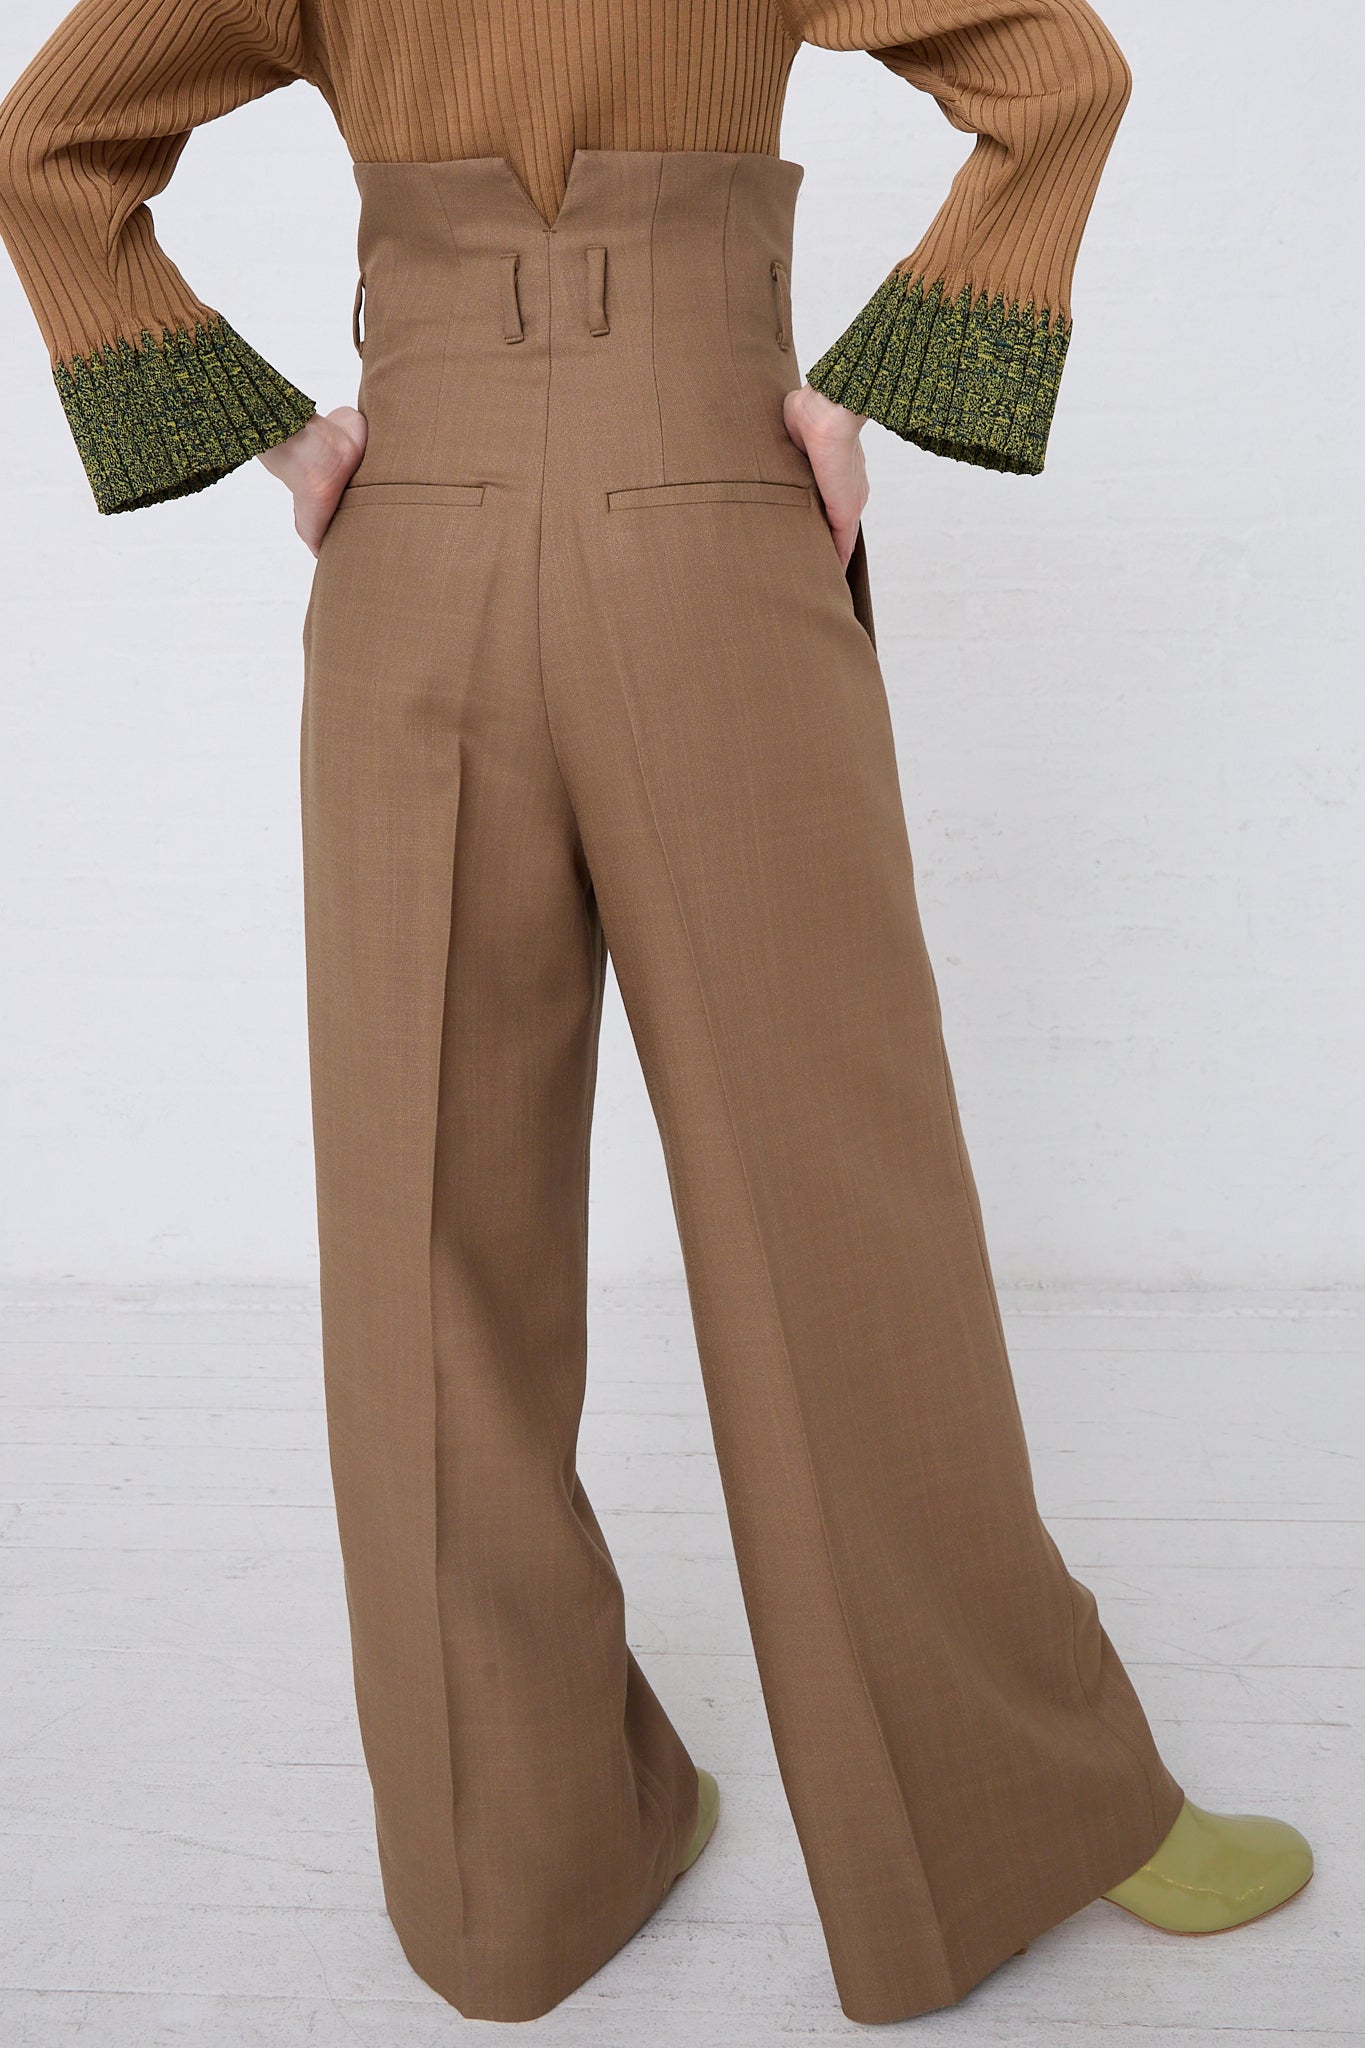 The back view of a woman wearing TOGA PULLA tan wide leg pants made from a woven rayon blend and a green sweater with a high curved waist.